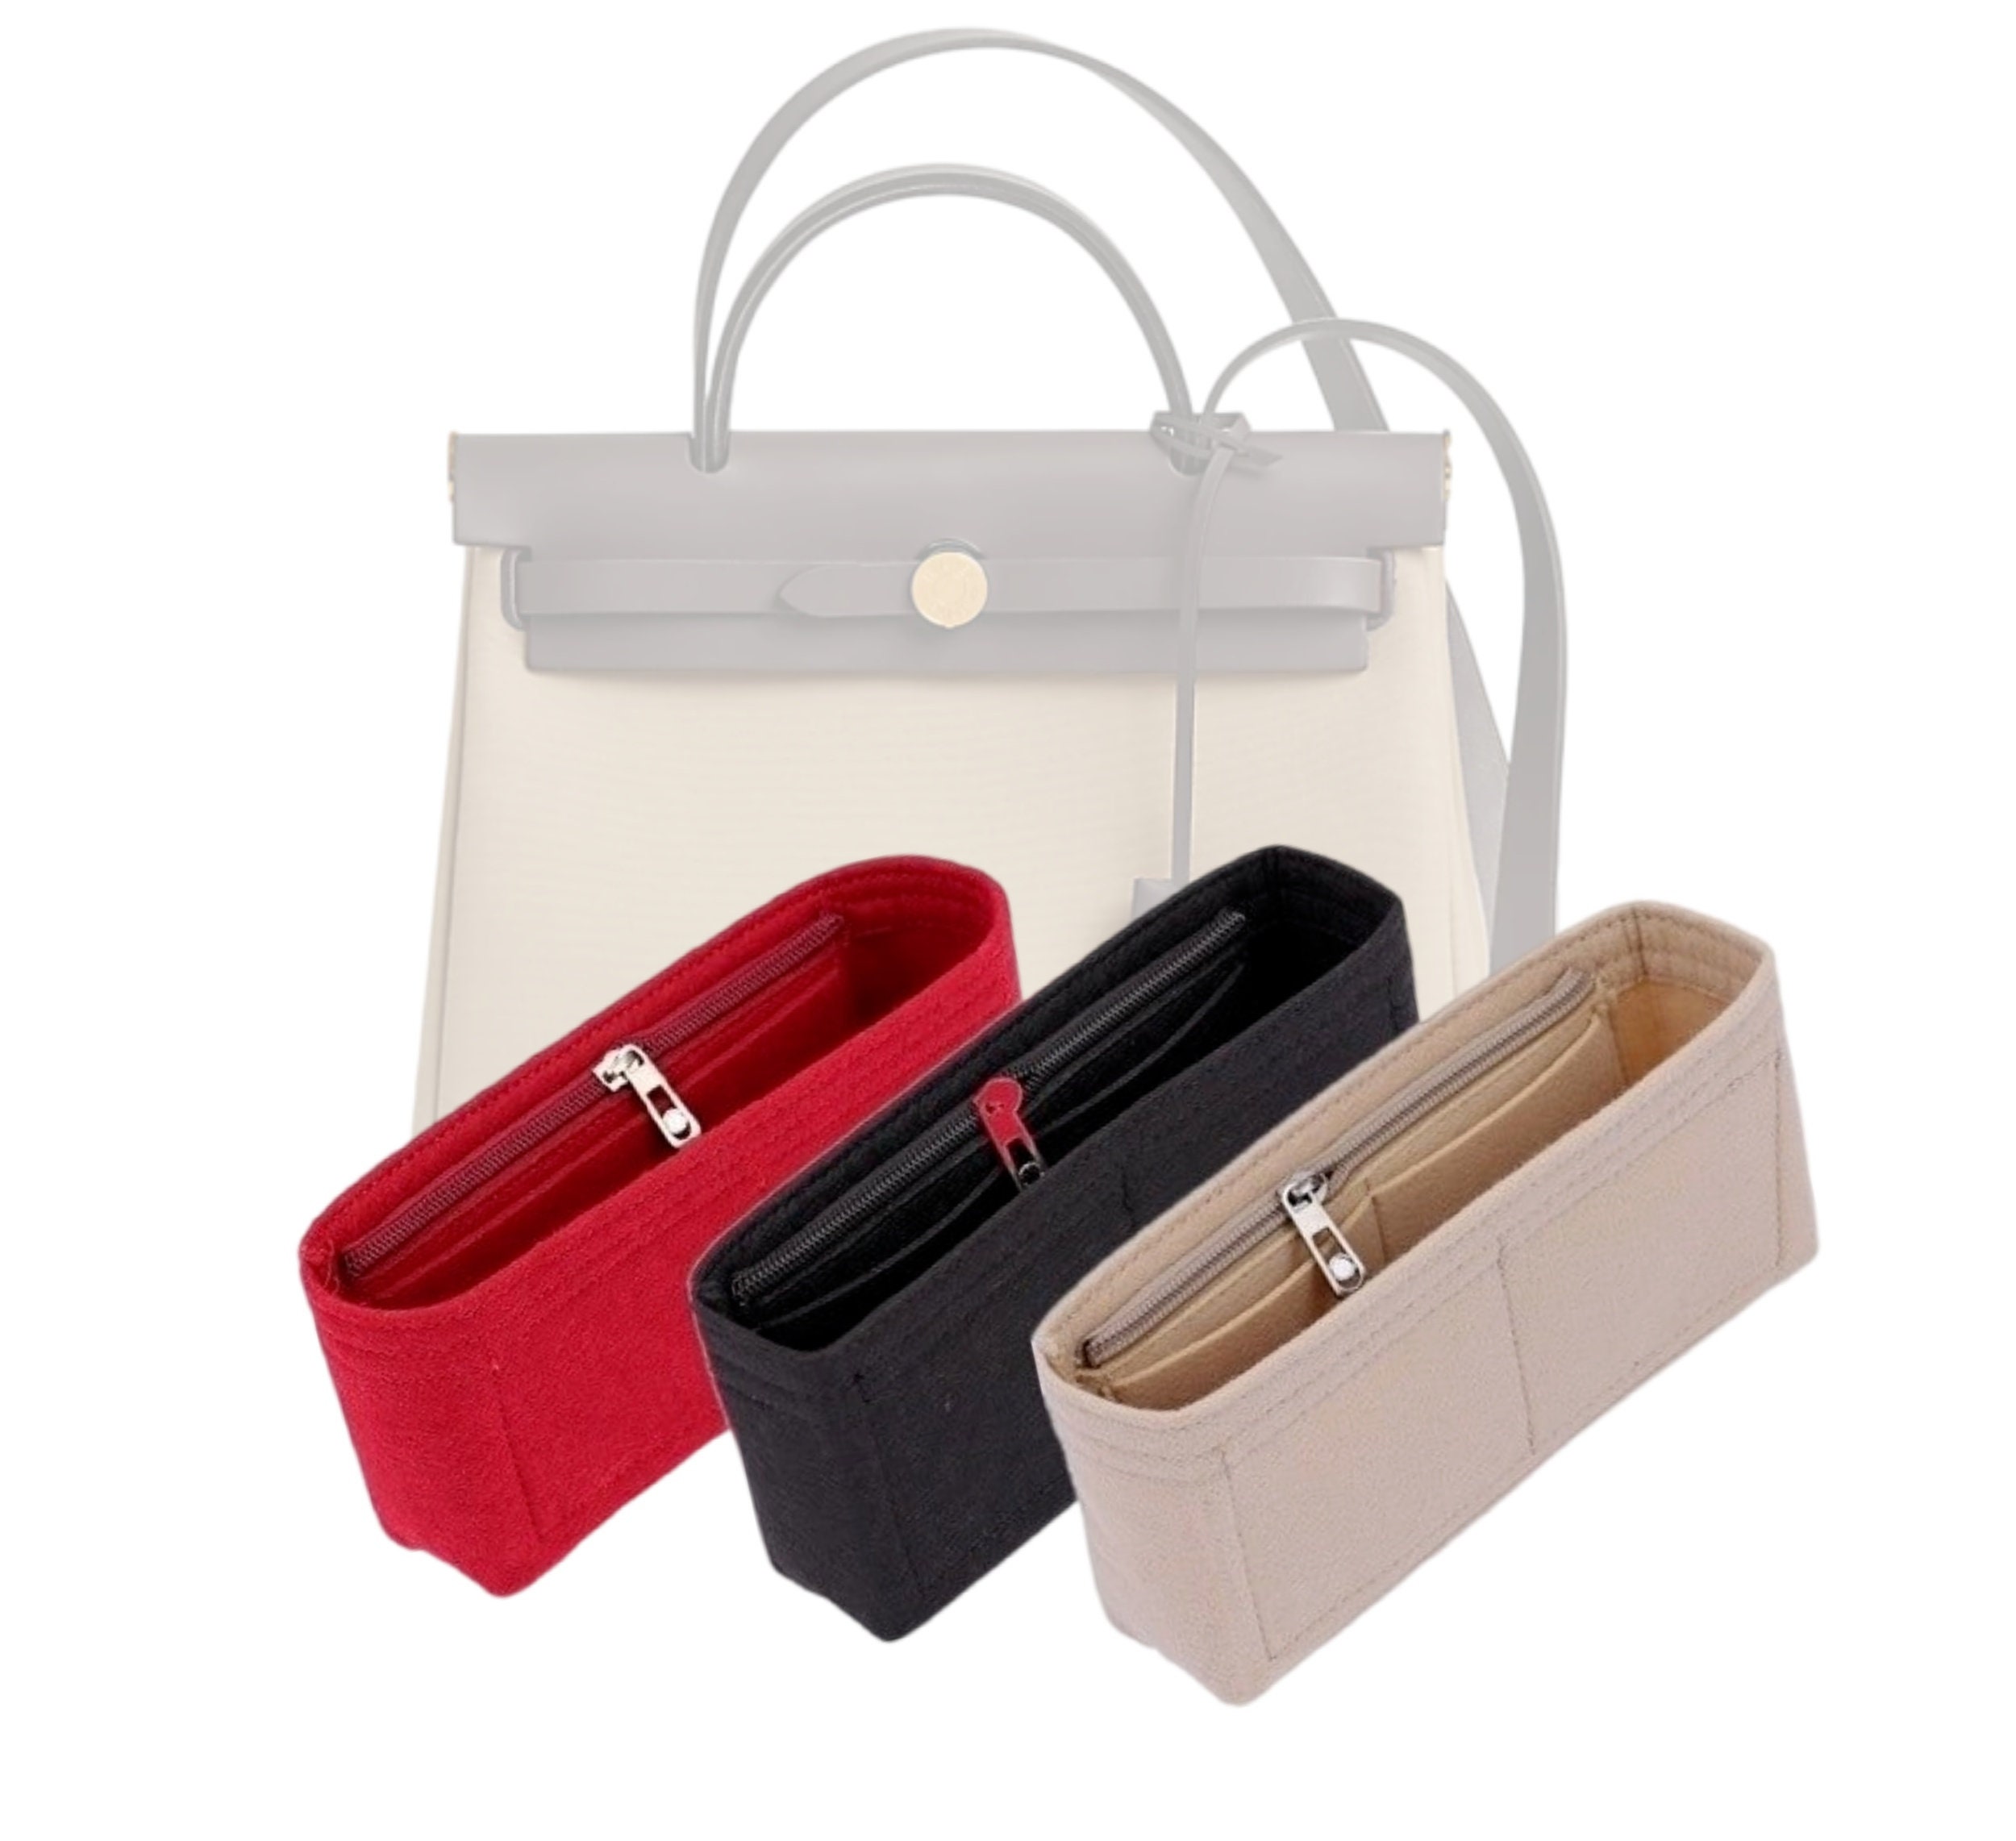 Bag and Purse Organizer with Singular Style for Hermes Herbag 39